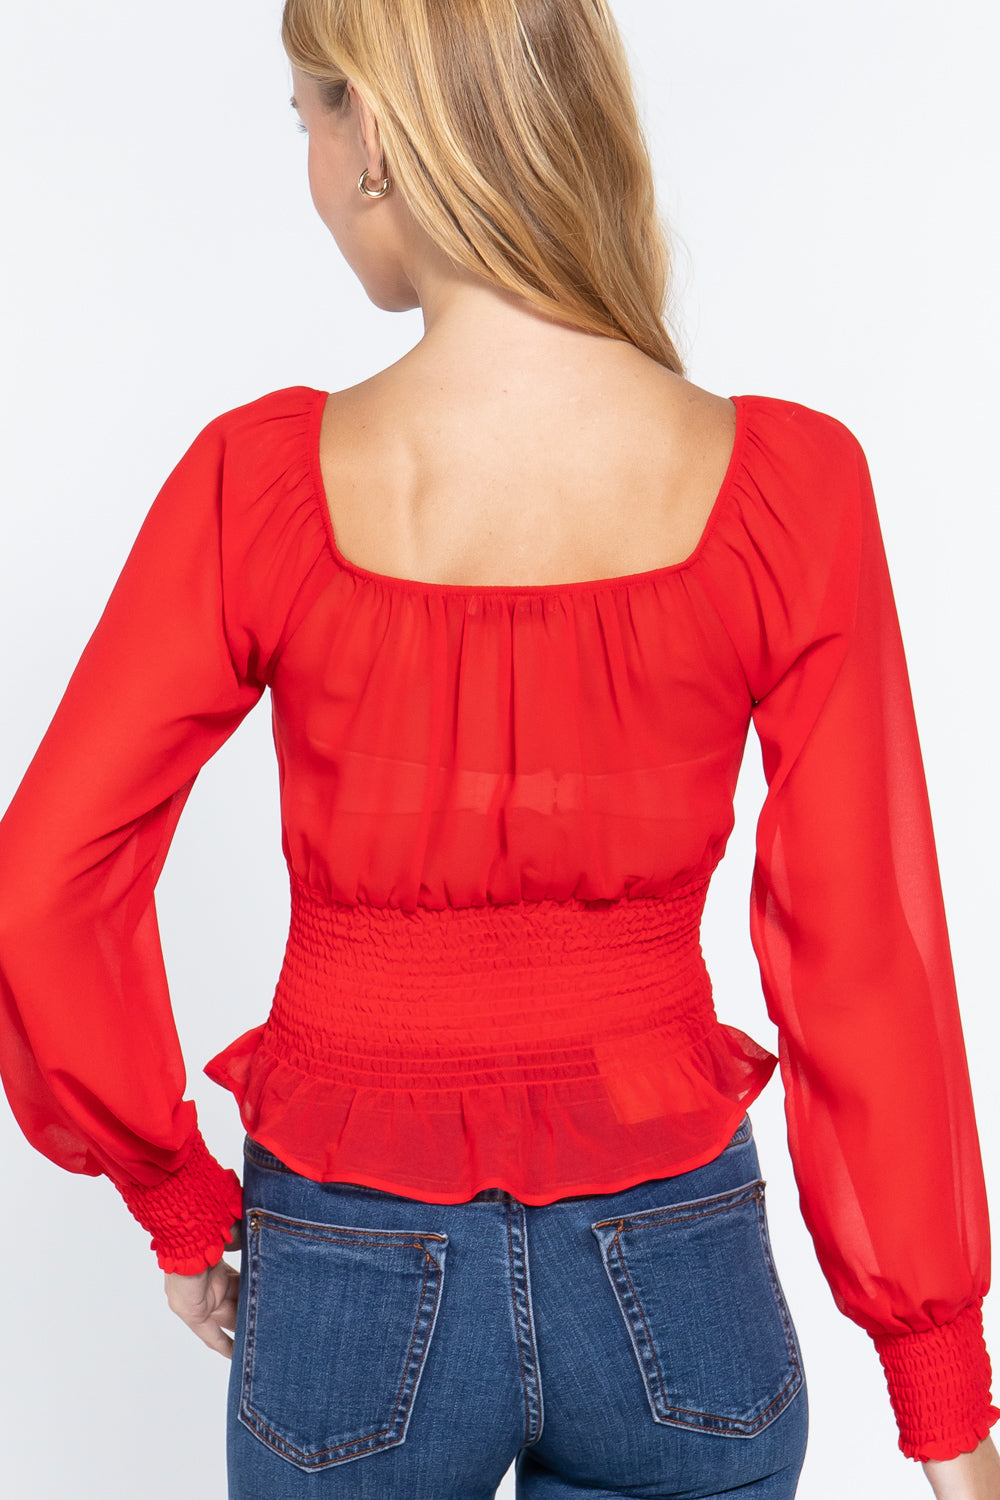 Long Sleeve Smocked Chiffon Top for Women in Red